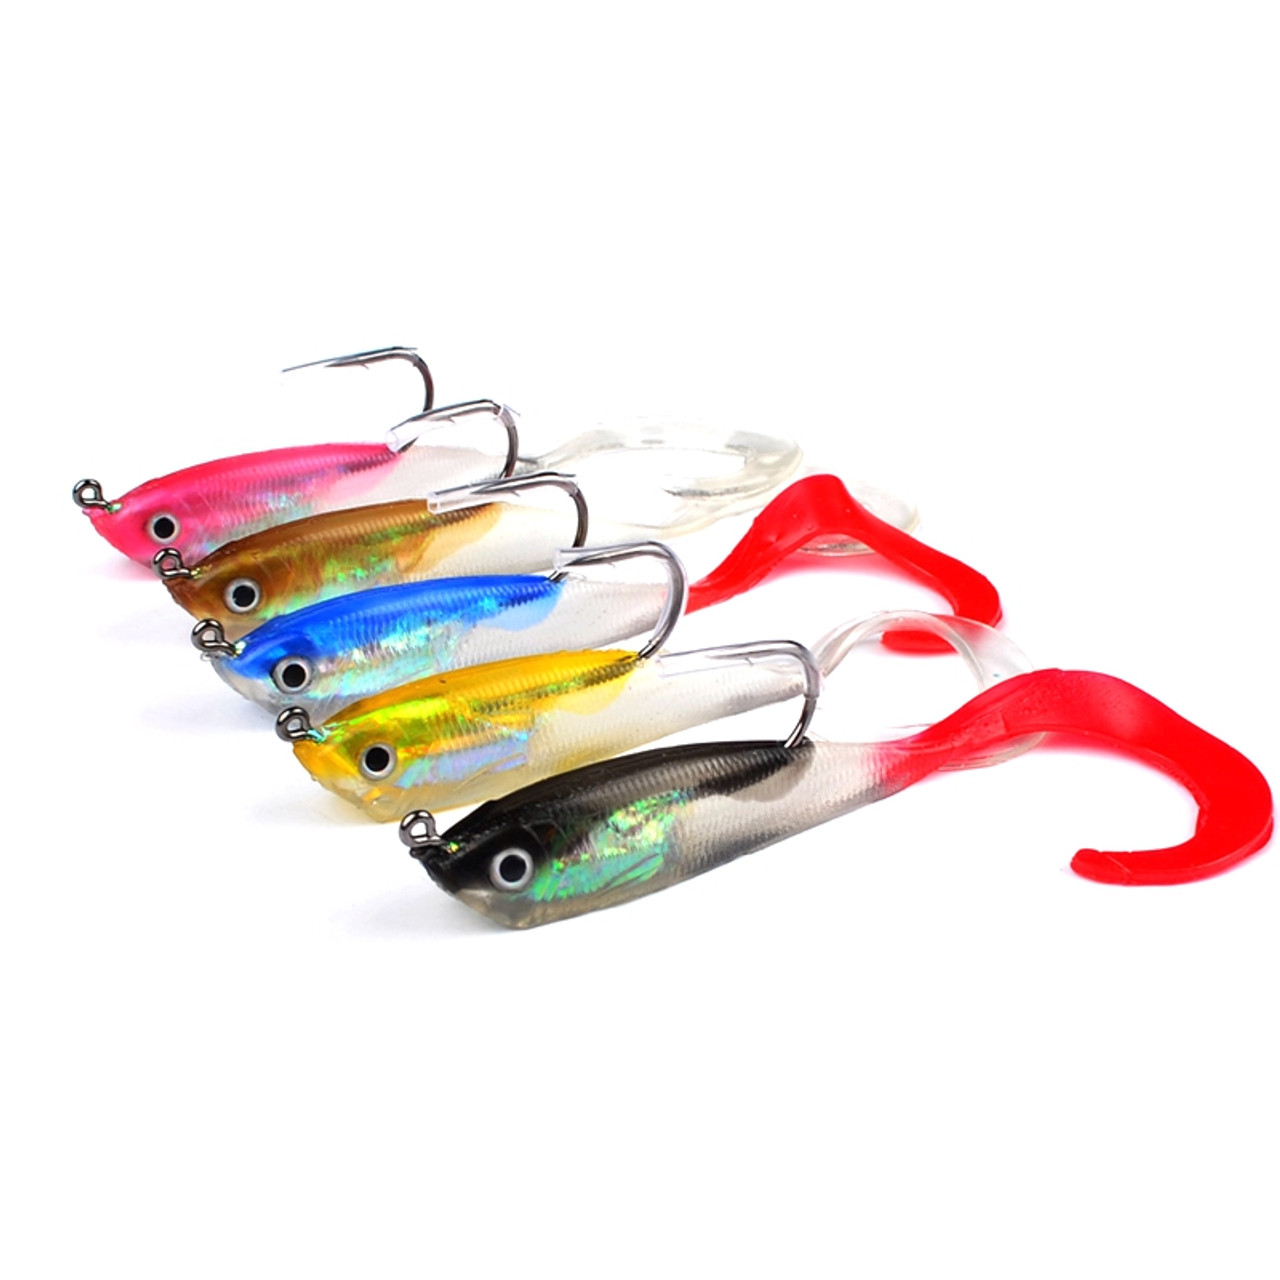 Curly Tail Soft Jelly Lure - Fishing in Tackle